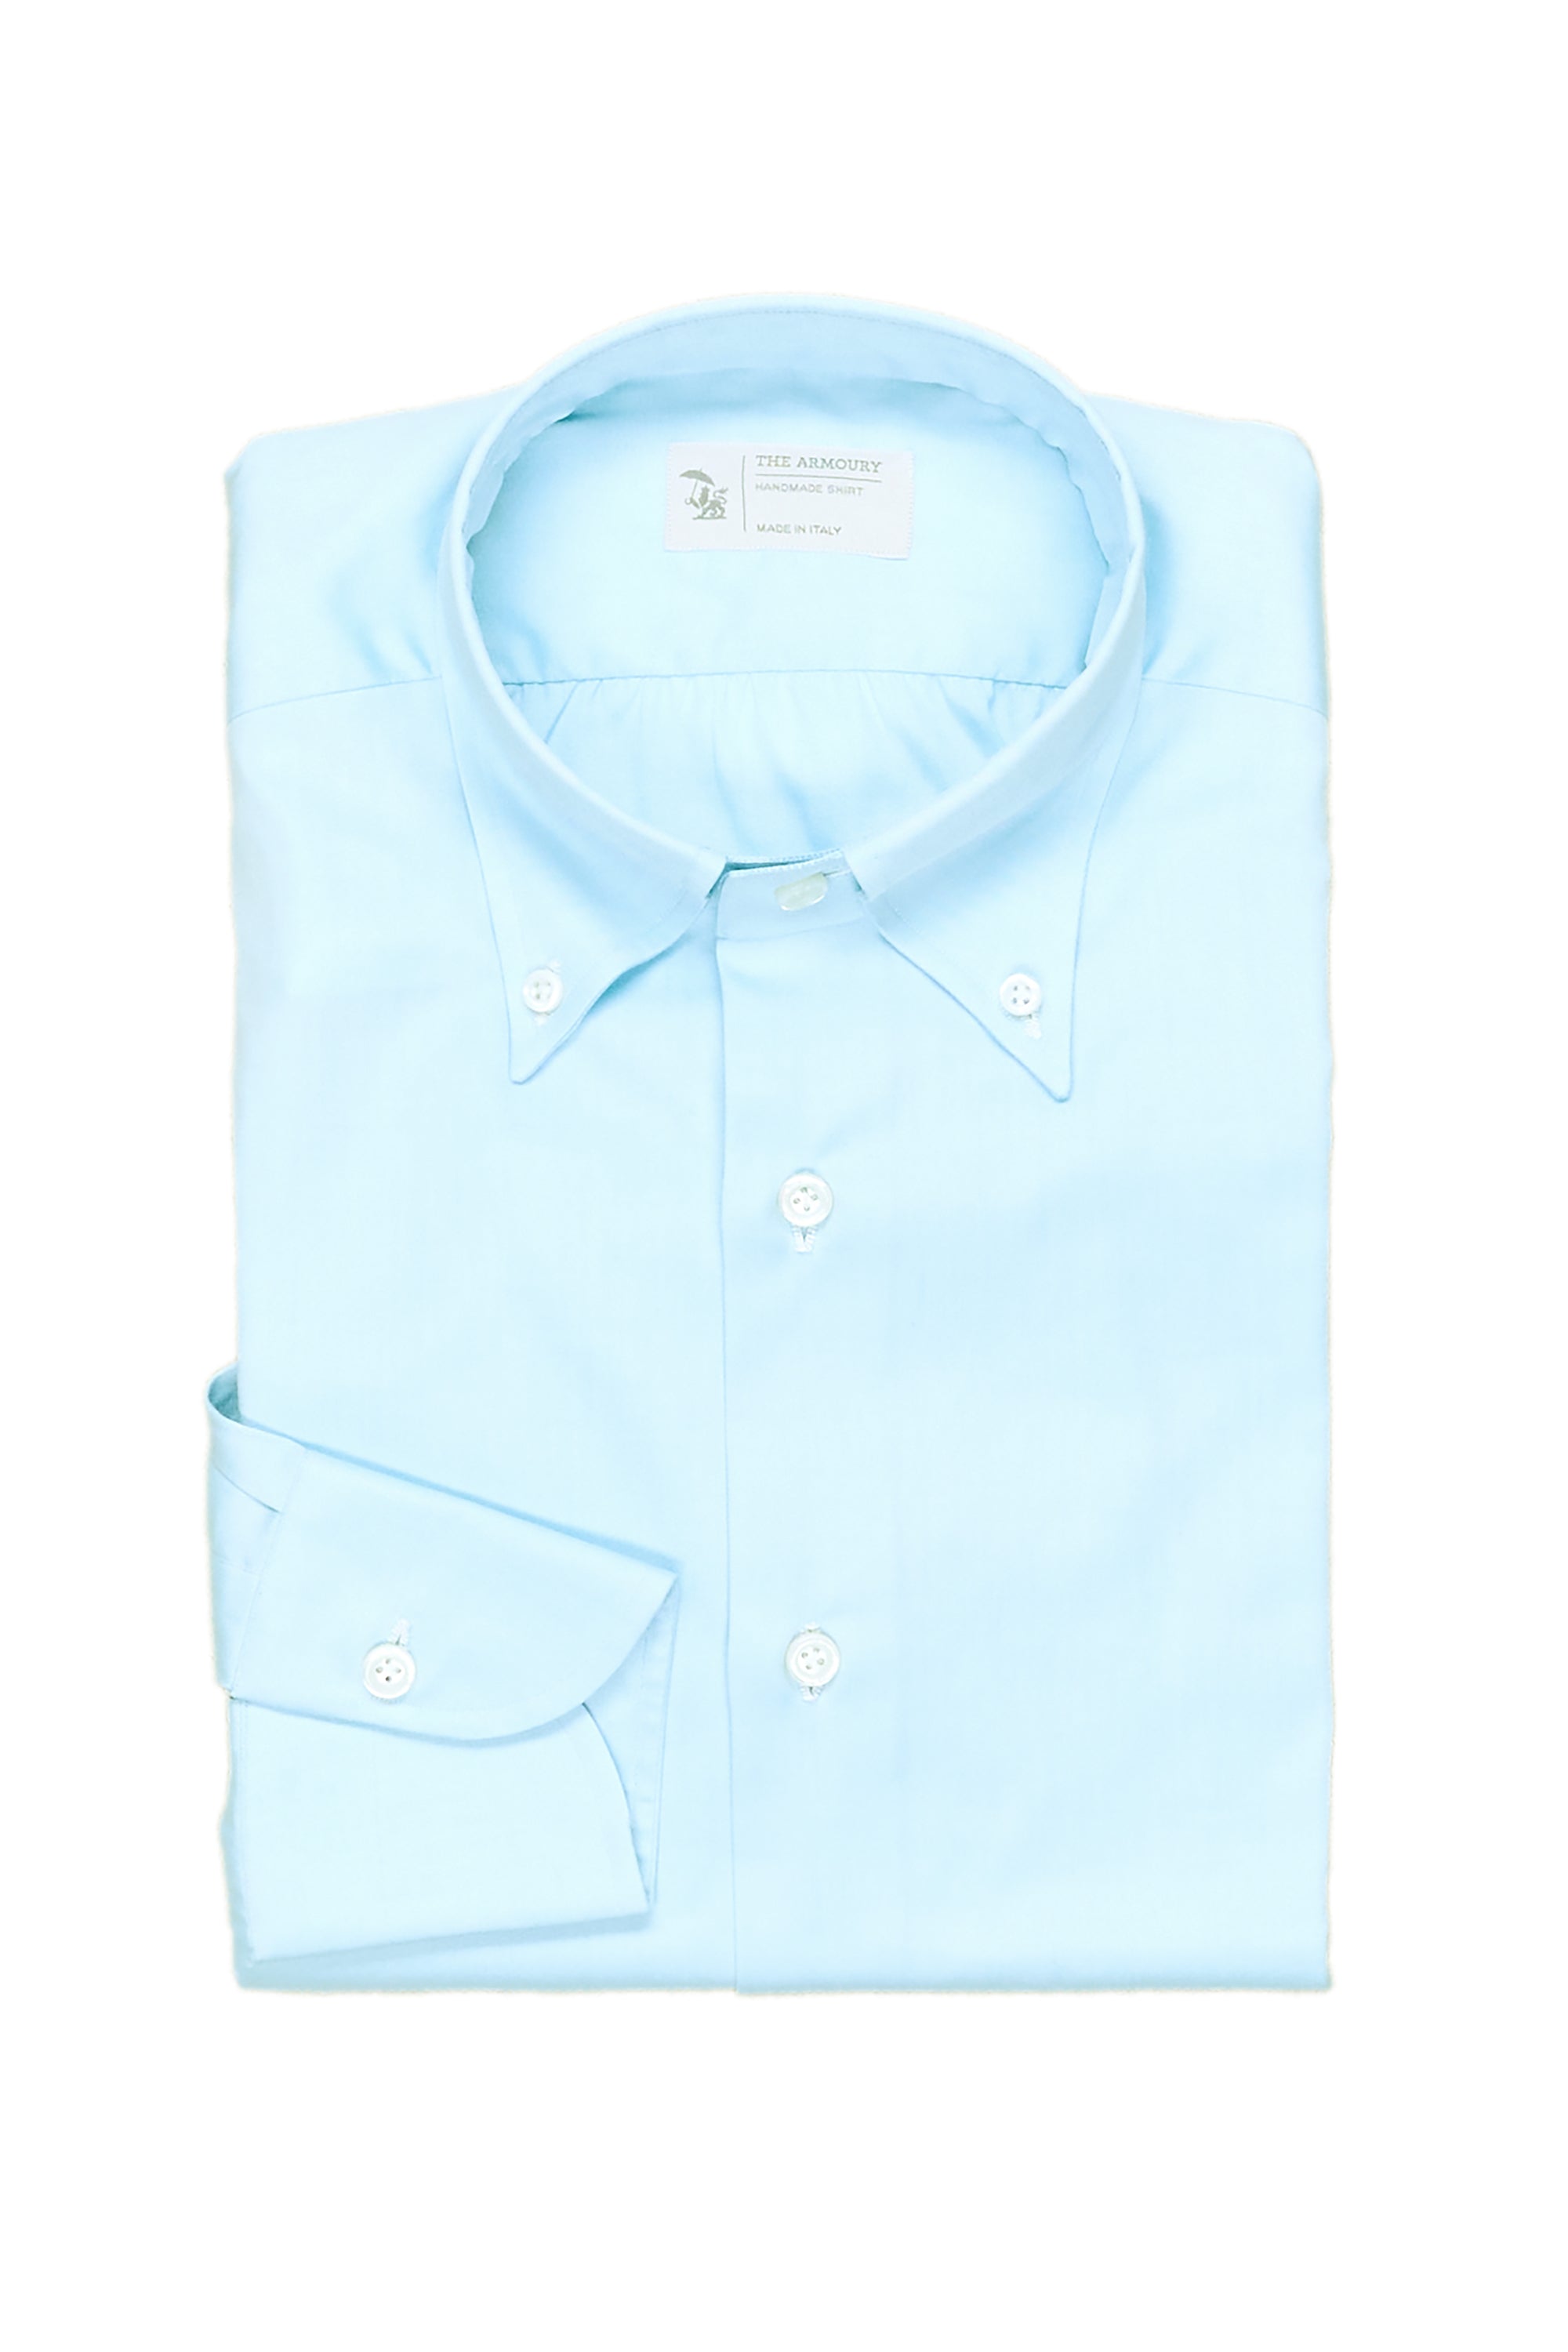 The Armoury Teal Blue Cotton Oxford Button Down Shirt